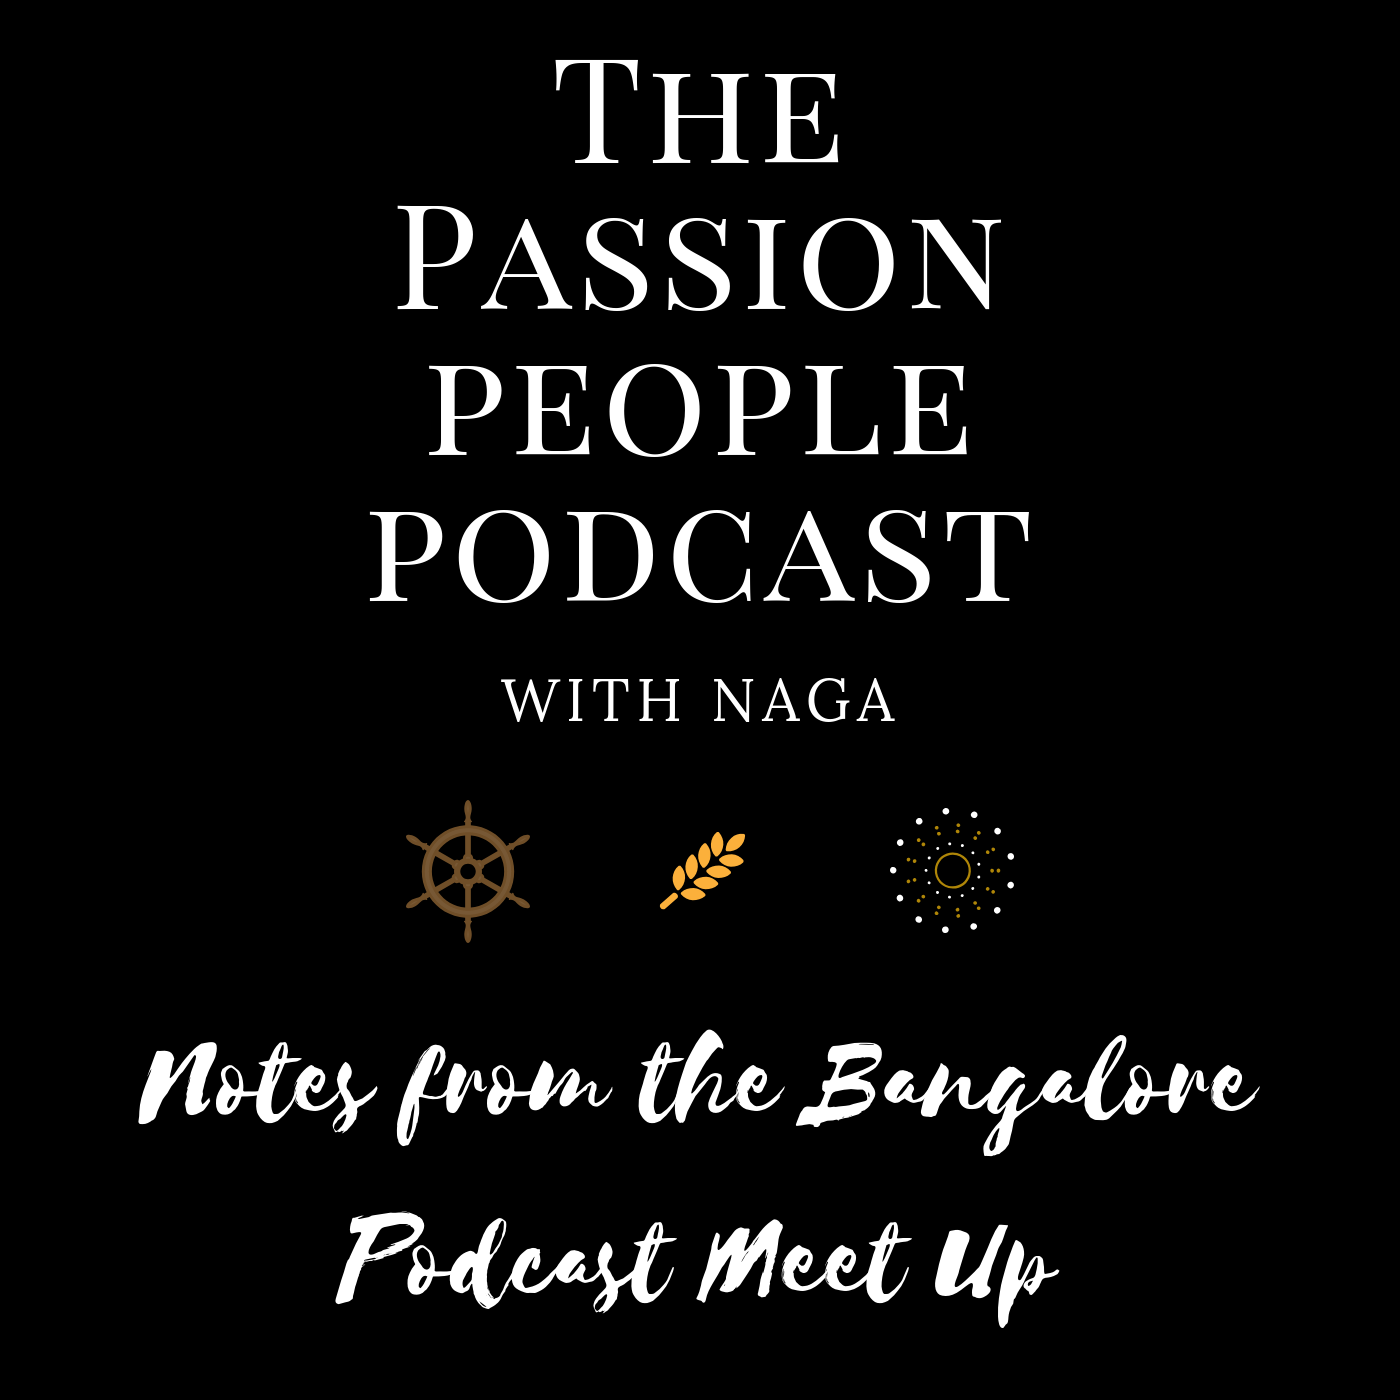 Bonus Episode - Notes from 5th Bangalore Podcast Meet Up!